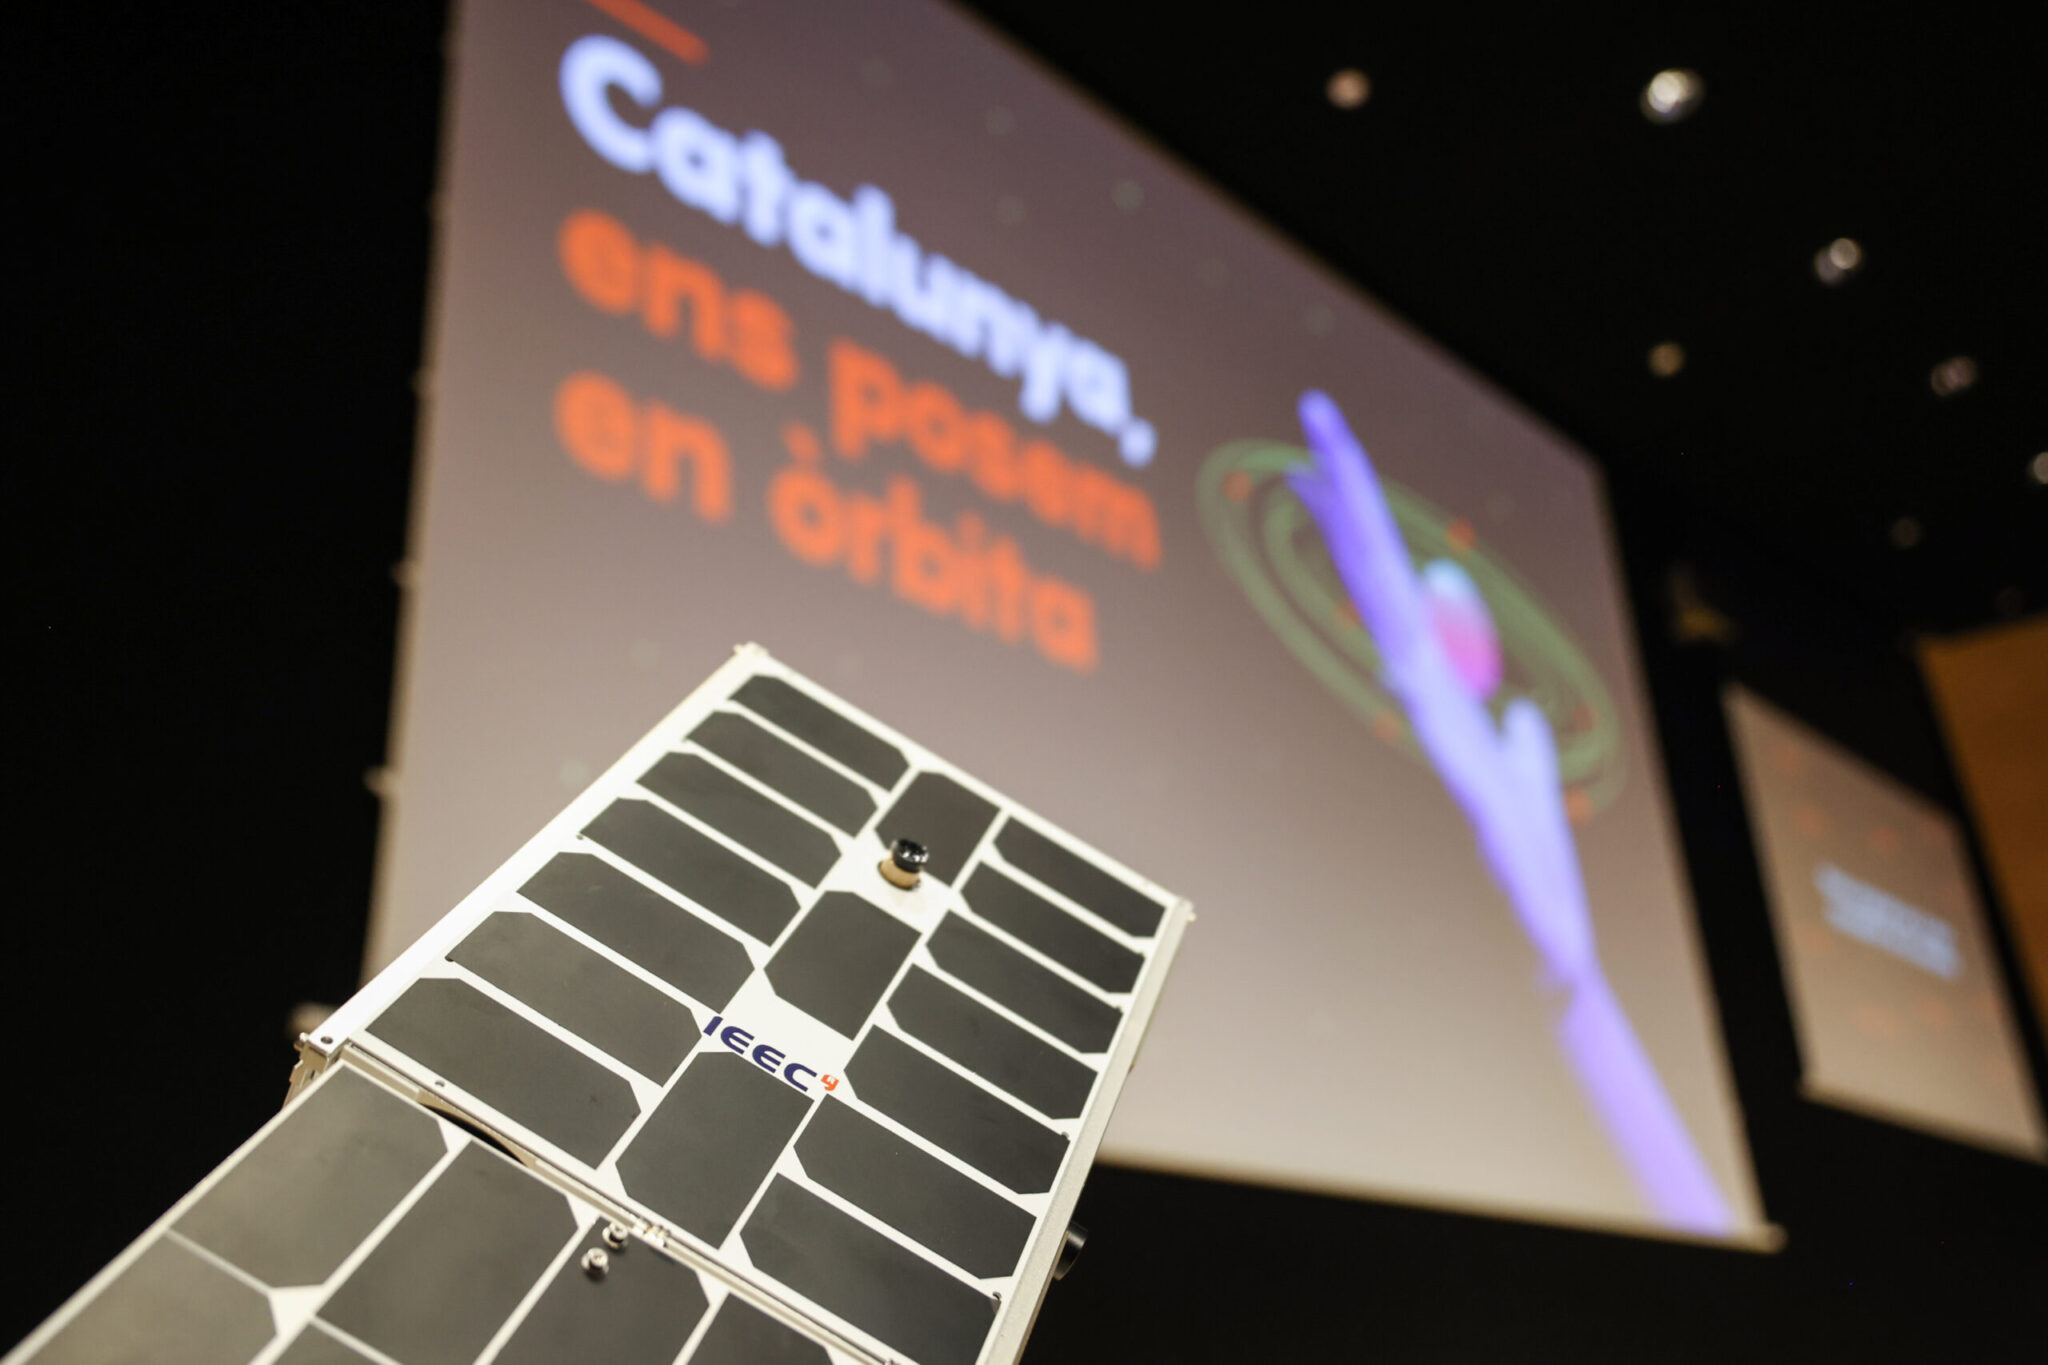 'Menut' (small), this will be the name of the second nanosatellite of the NewSpace Strategy of Catalonia.